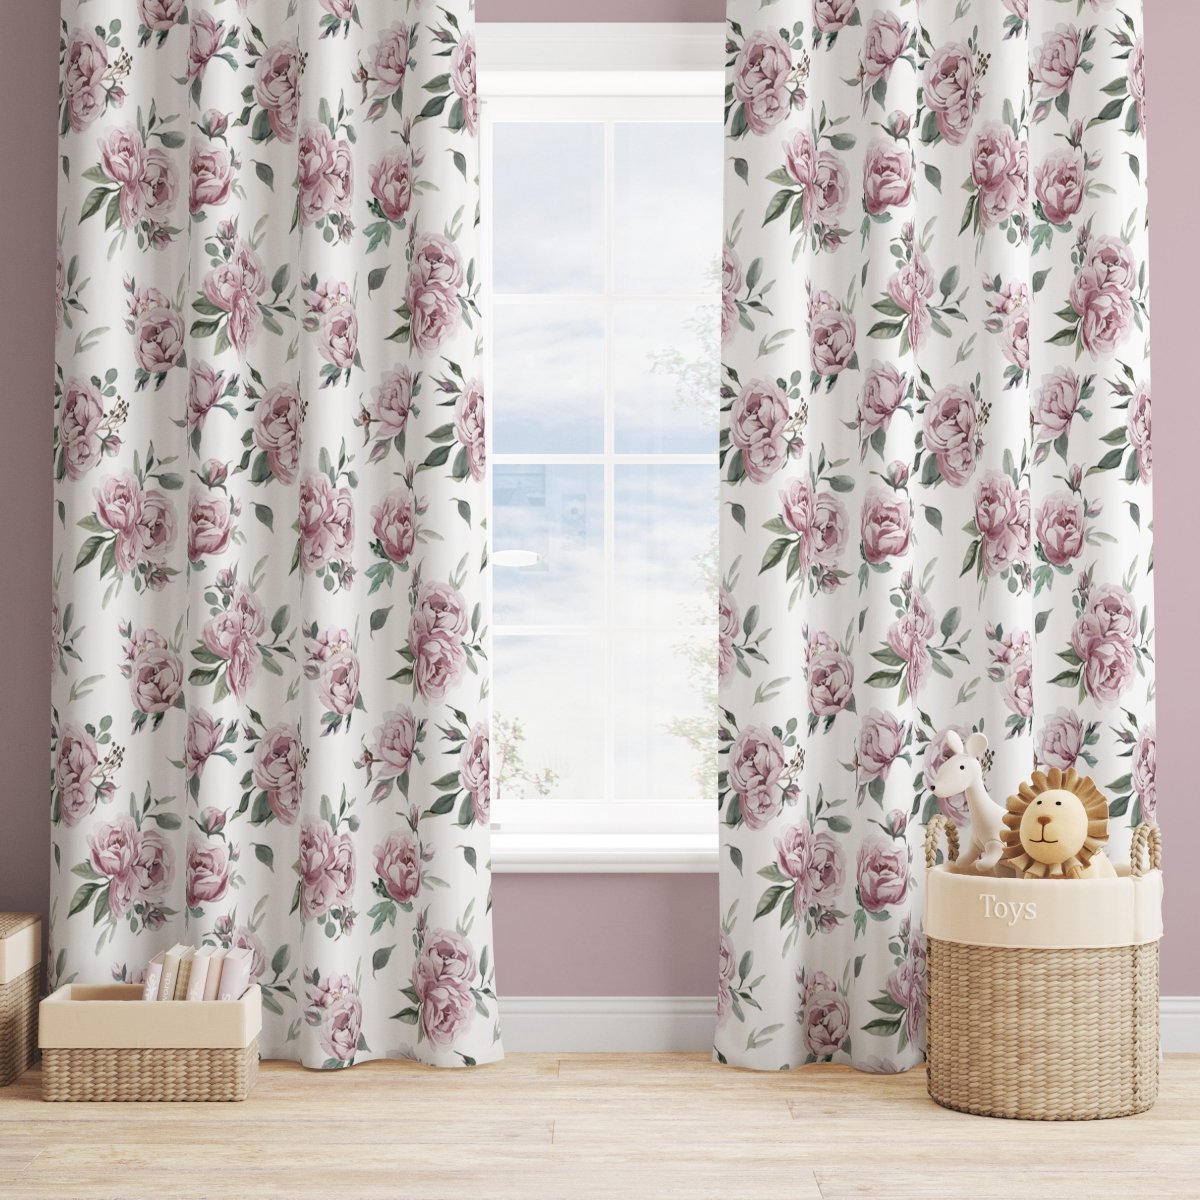 Peony Floral Curtain Panel - Floral Elephant, gender_girl, Theme_Floral